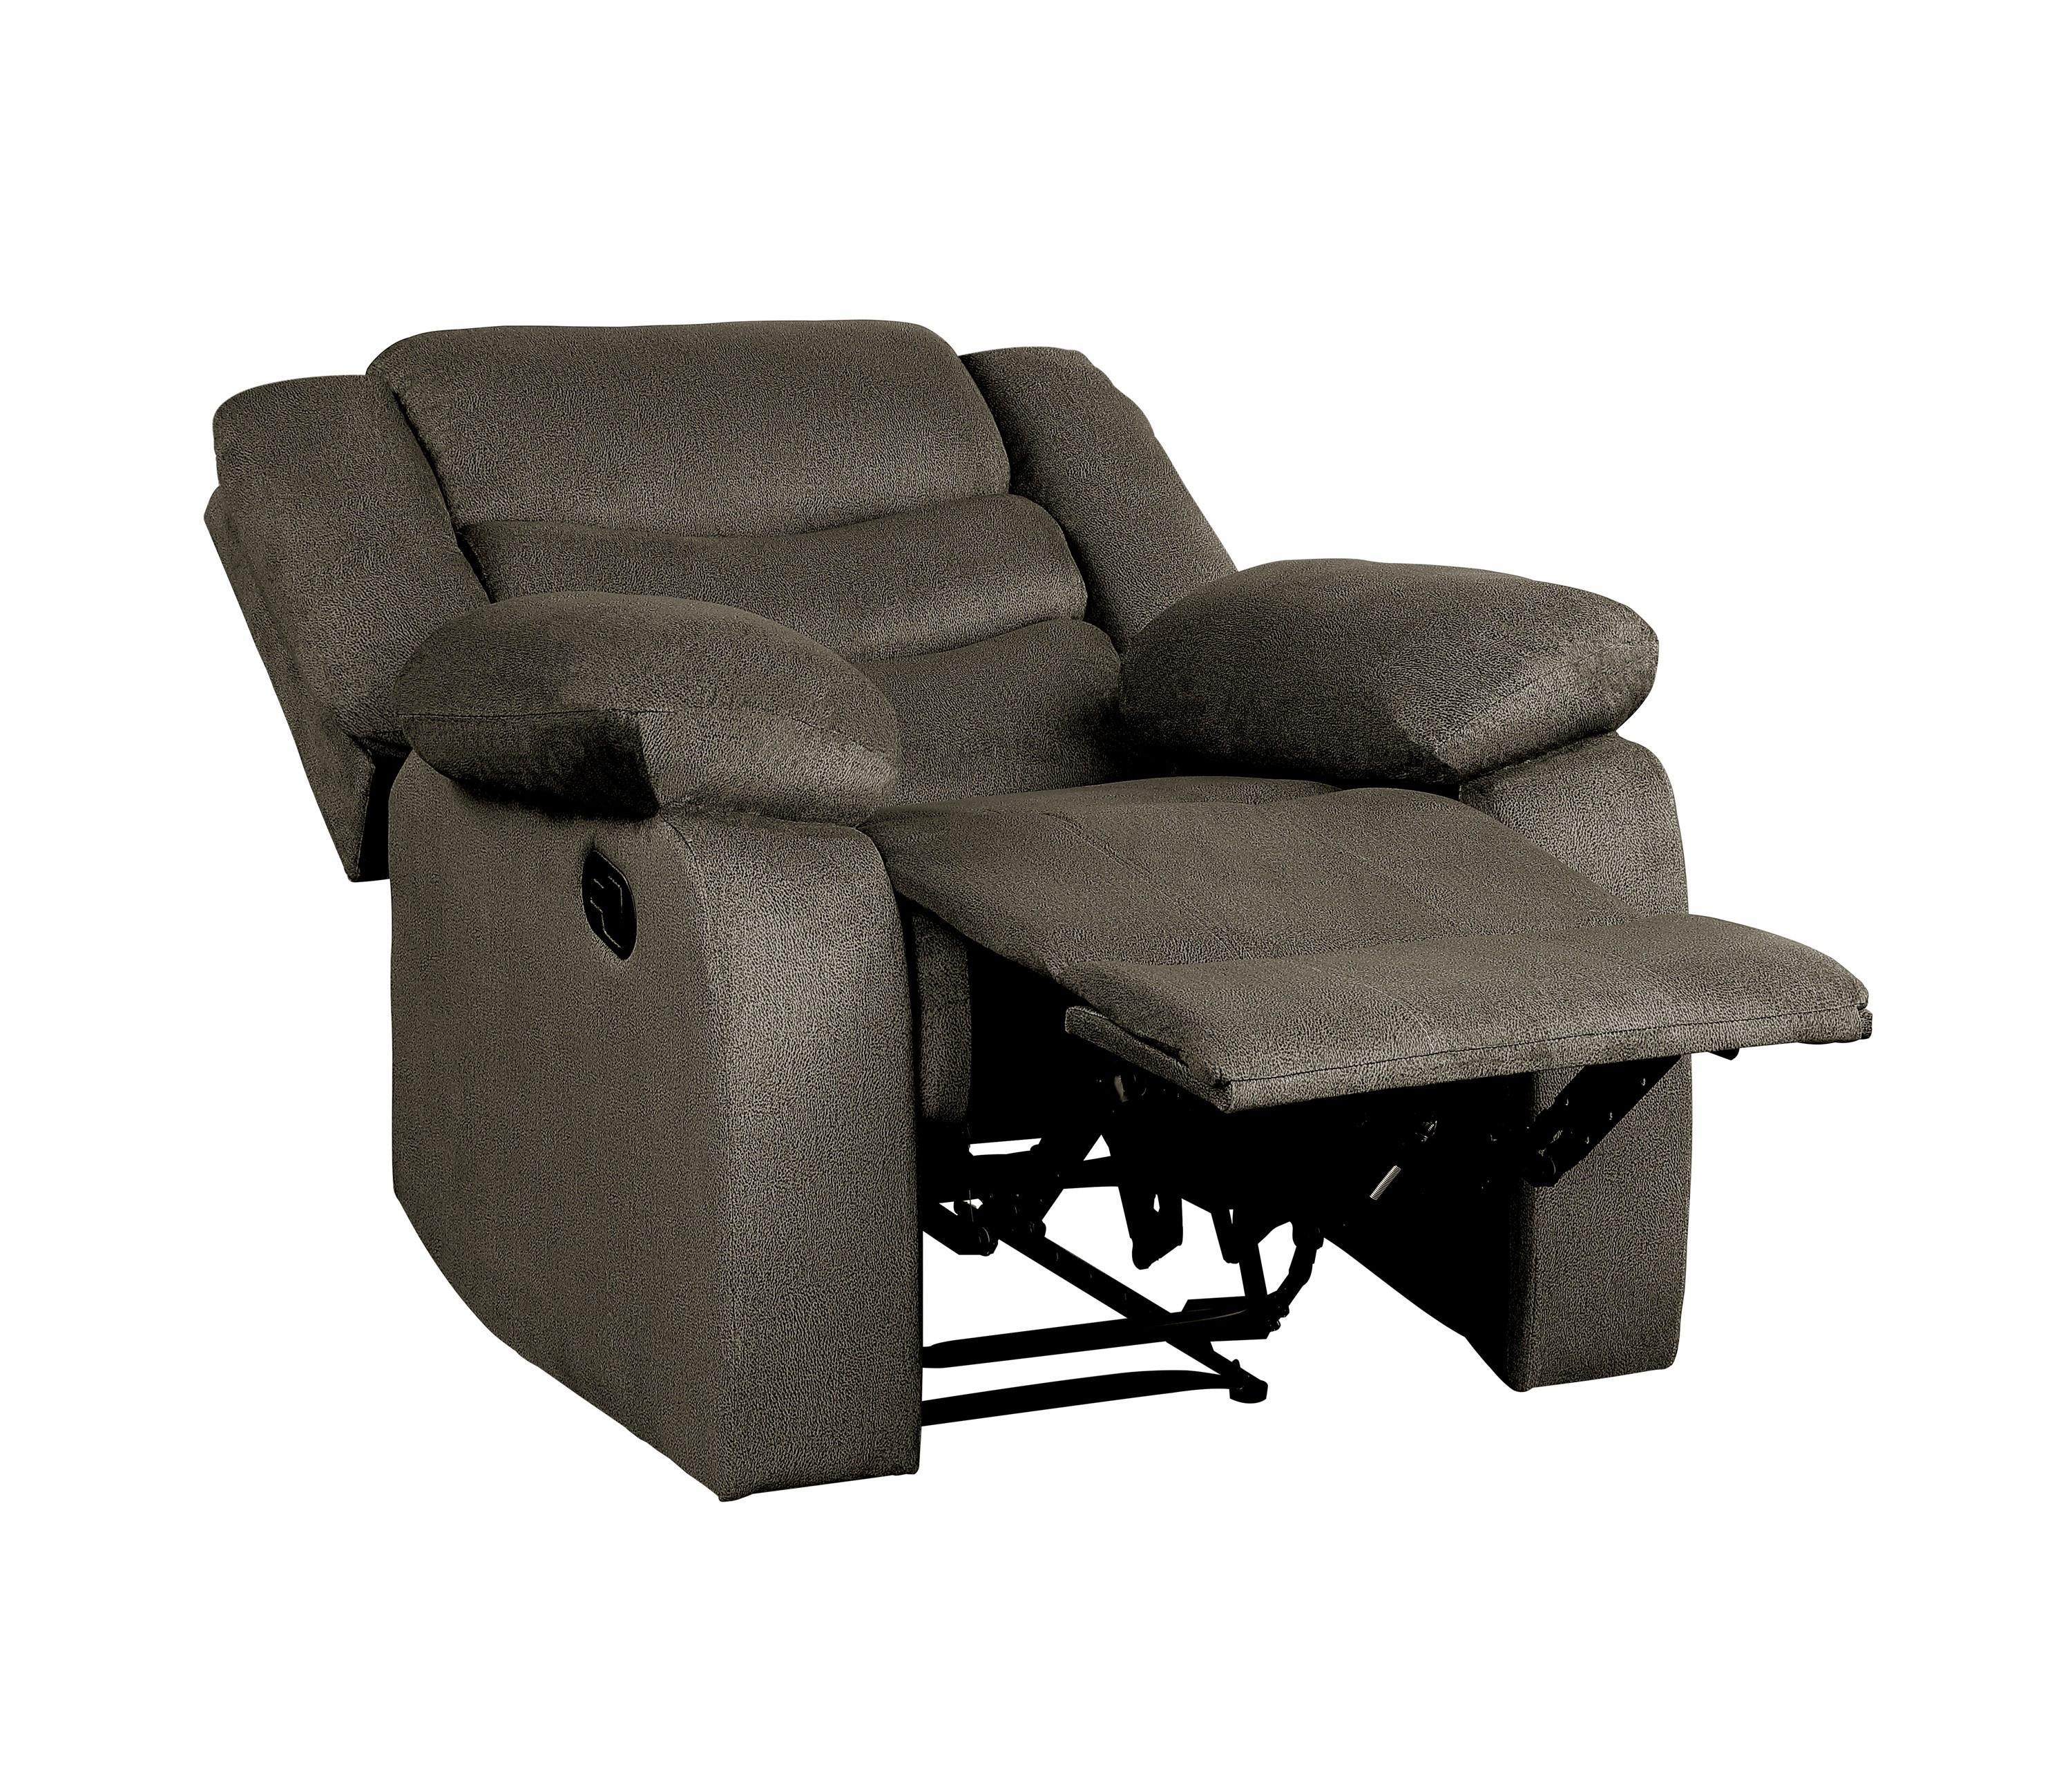 

    
Homelegance 9526BR-1 Discus Reclining Chair Brown 9526BR-1
